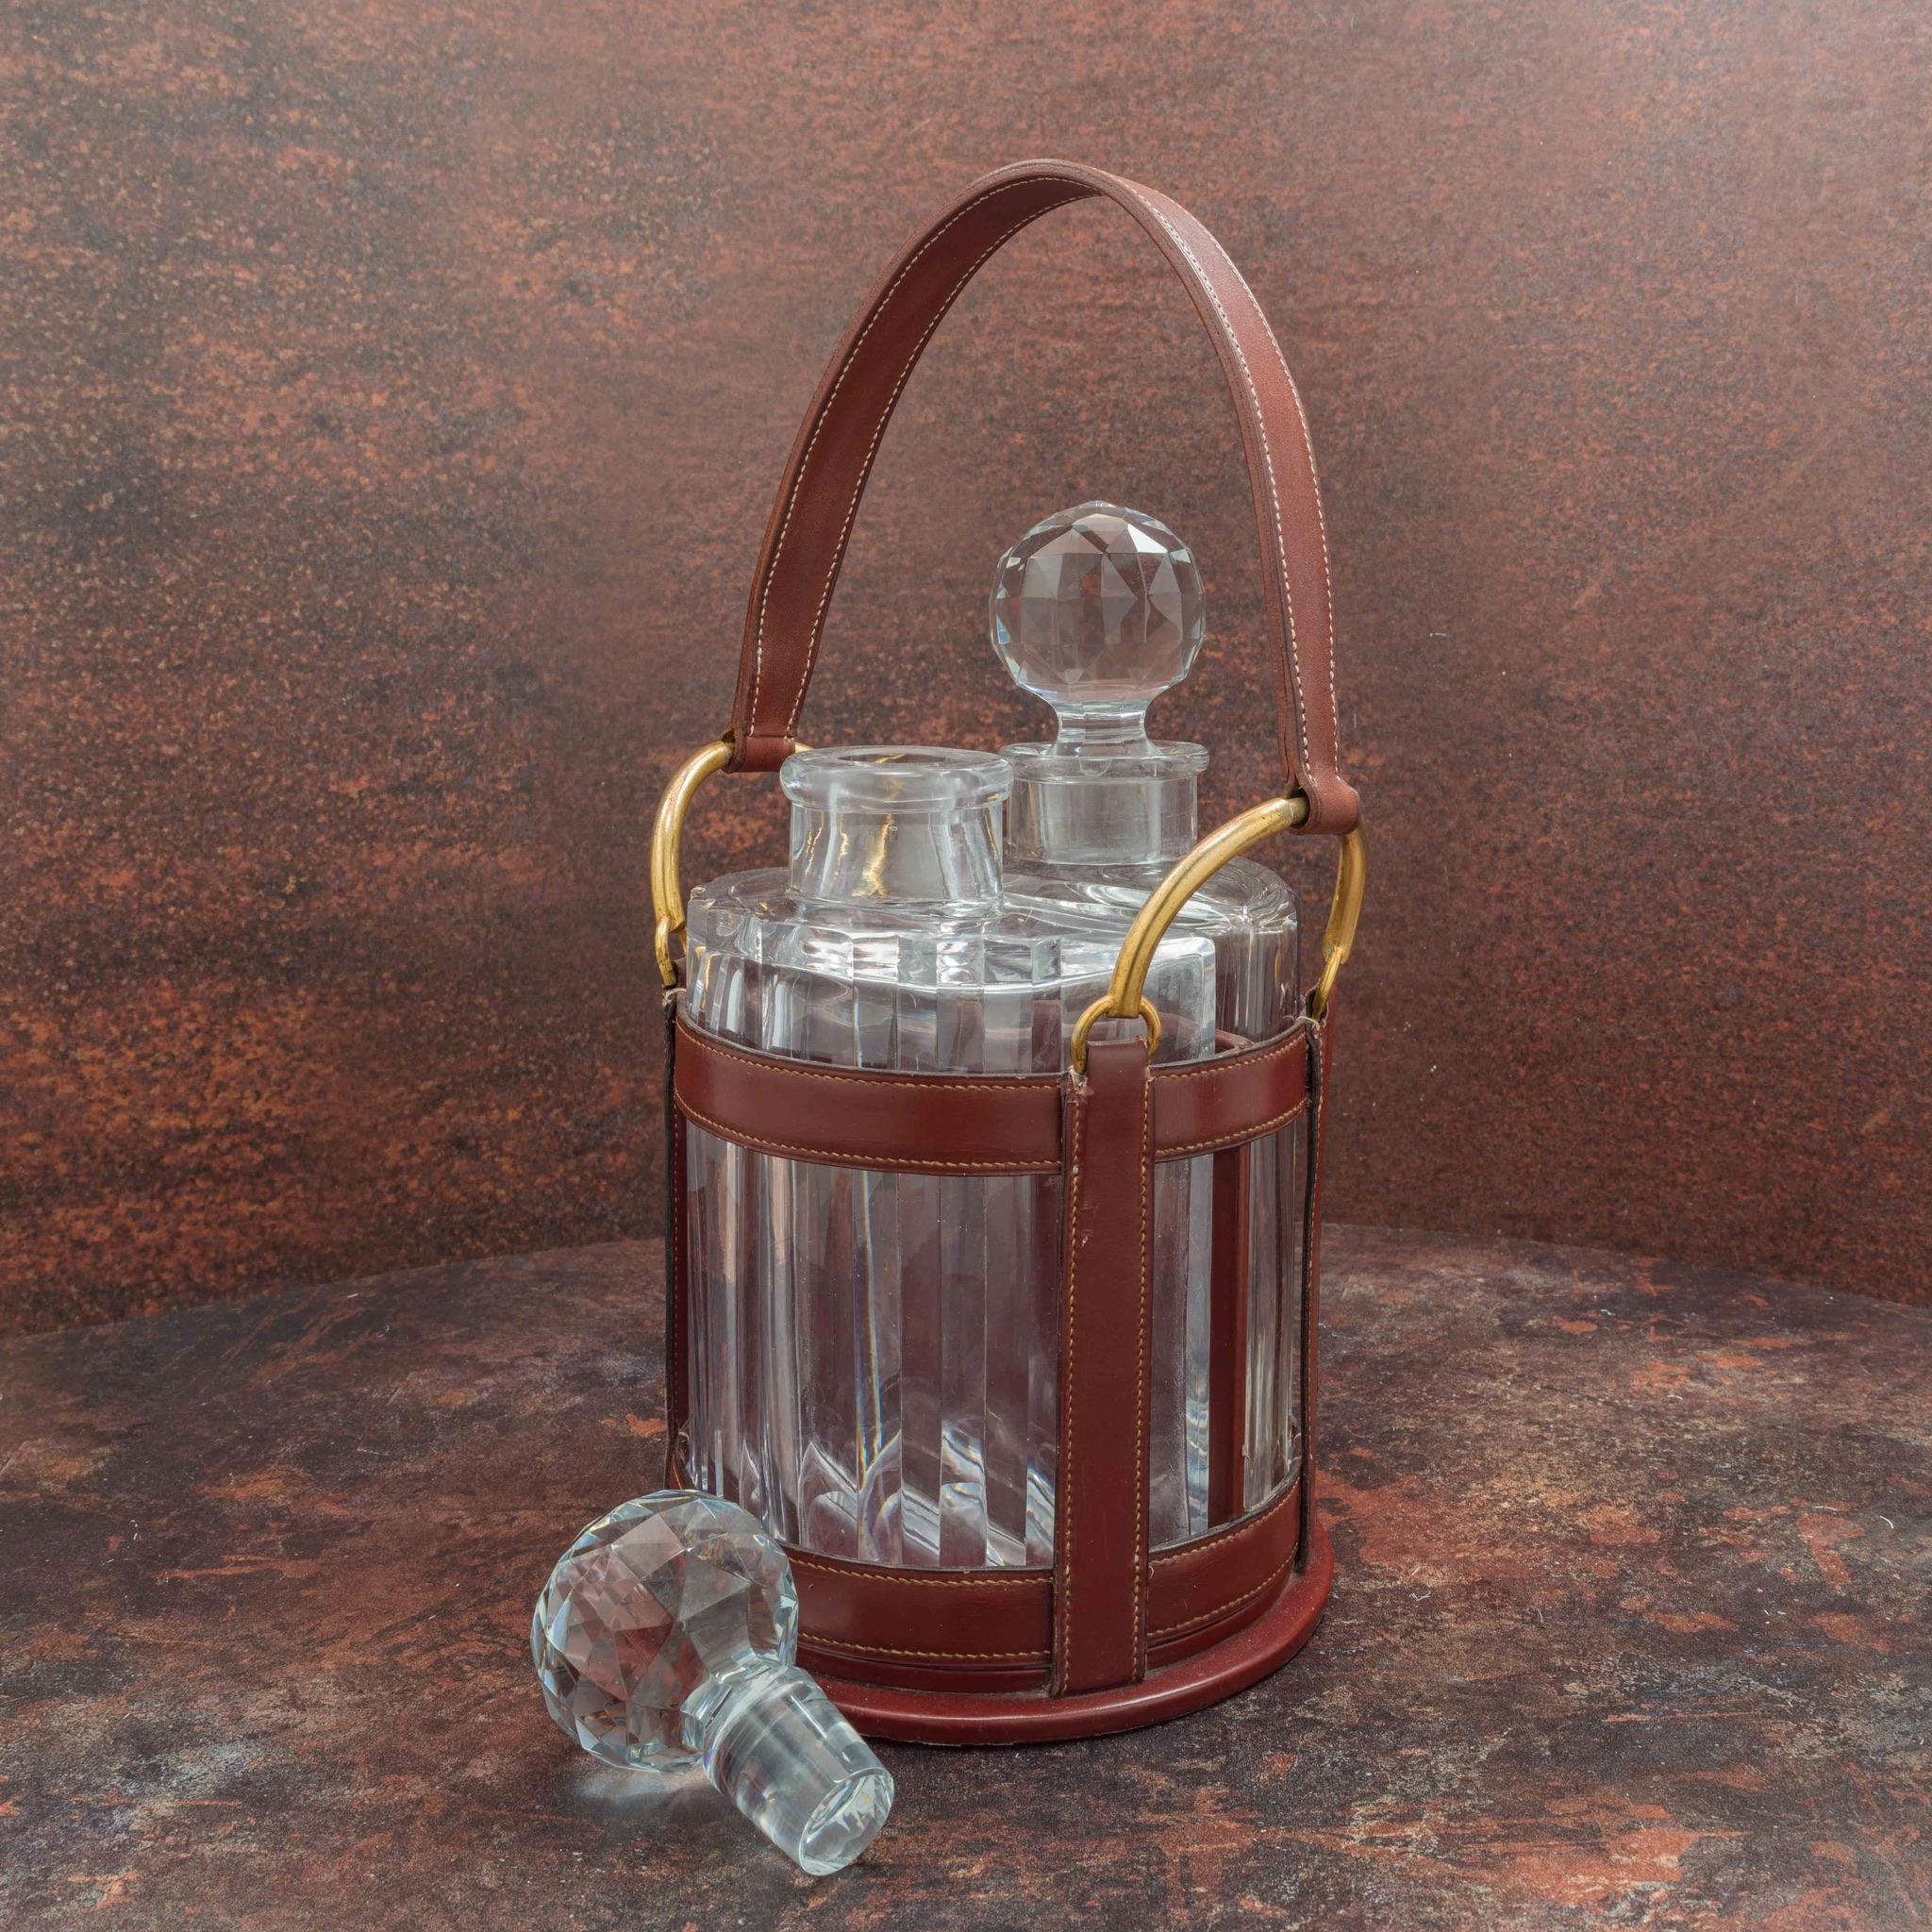 A fabulous drinks set by Hermès, circa 1955 to a design by Jacques Adnet, with cut crystal decanters. One of the decanters is by Baccarat, the other is unmarked and may be a replacement. Our master saddler has replaced the worn-out original handle